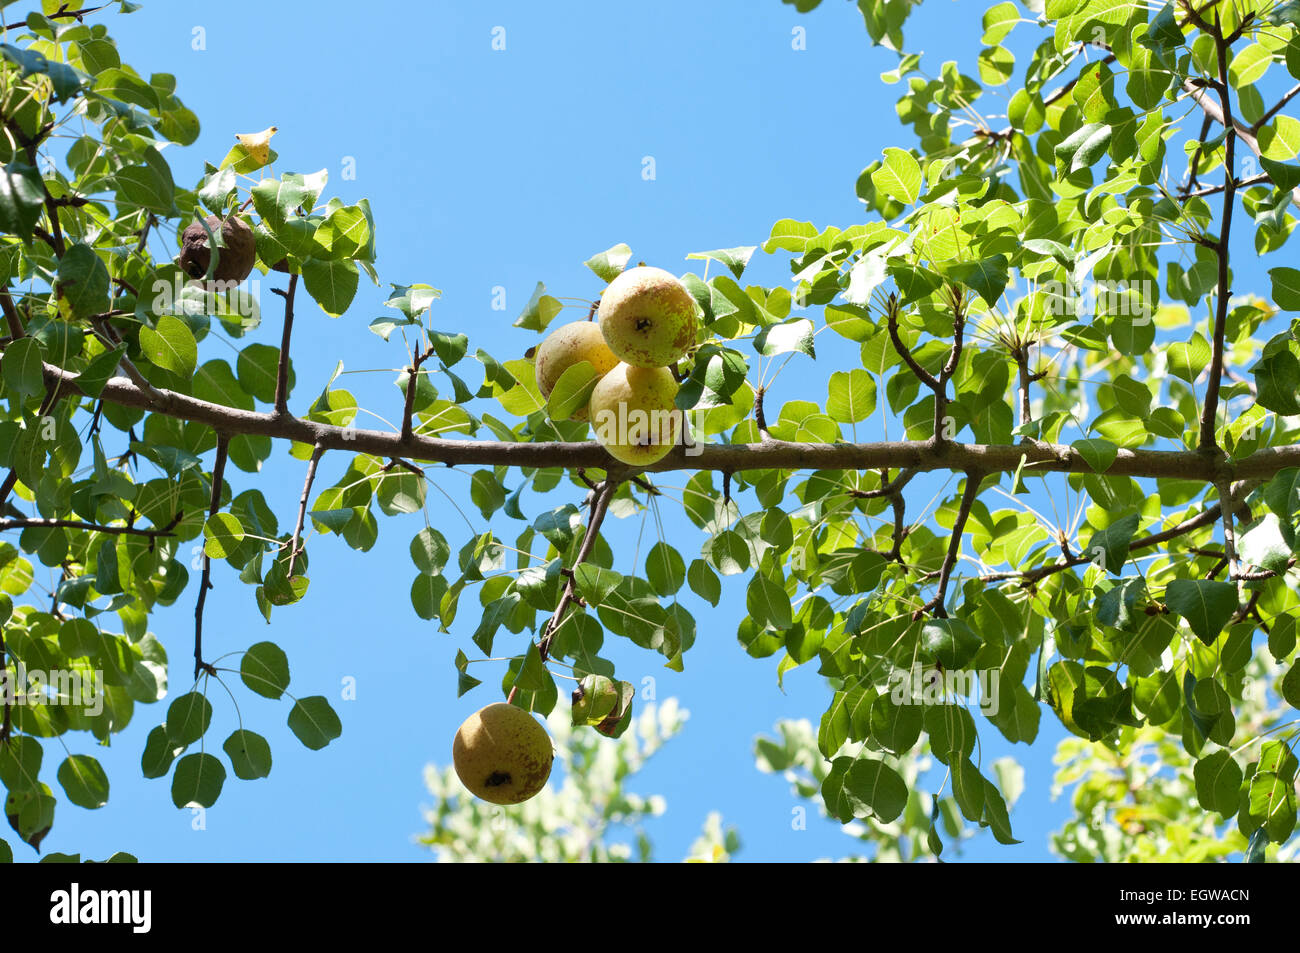 Leaves and fruits of Iberian pear, Pyrus bourgaeana Stock Photo